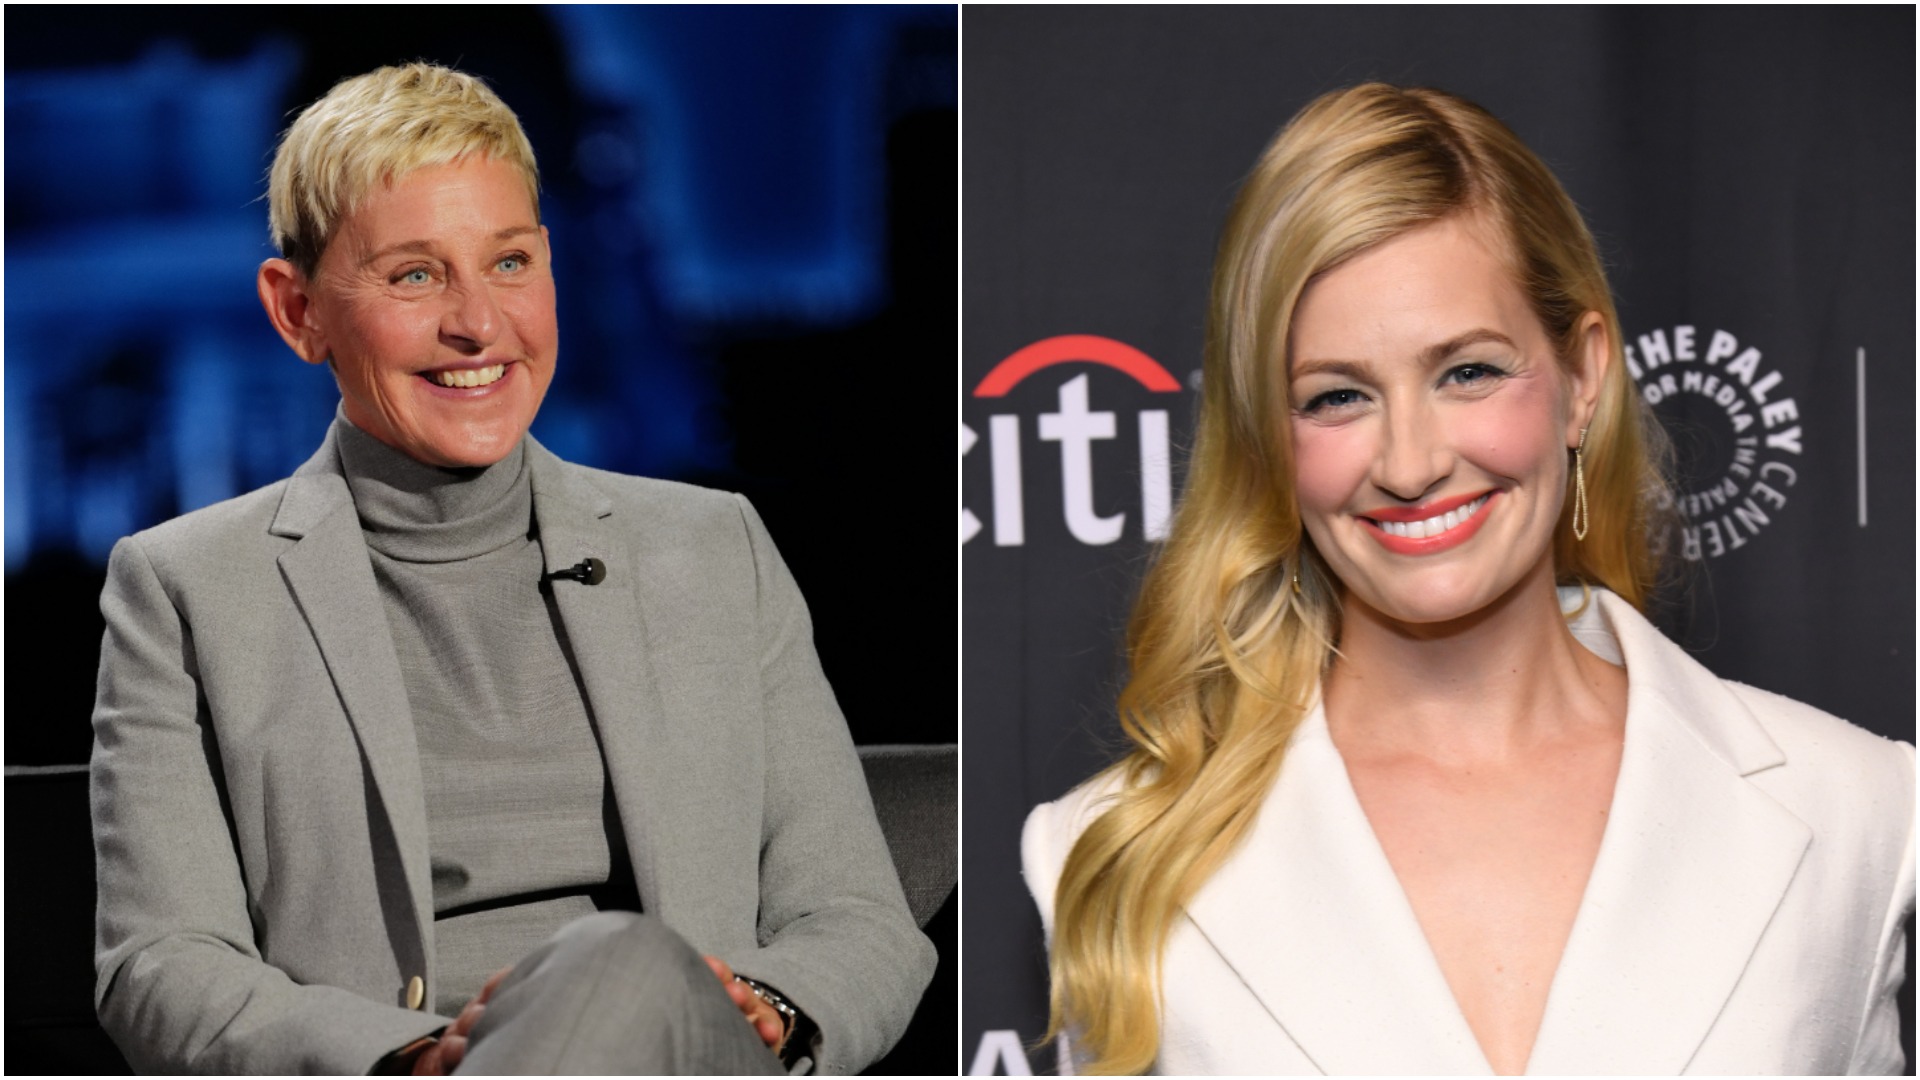 Beth Behrs Shares What Happened to the Cowbell Ellen DeGeneres Gifted Her – Too Much Cowbell [Exclusive]